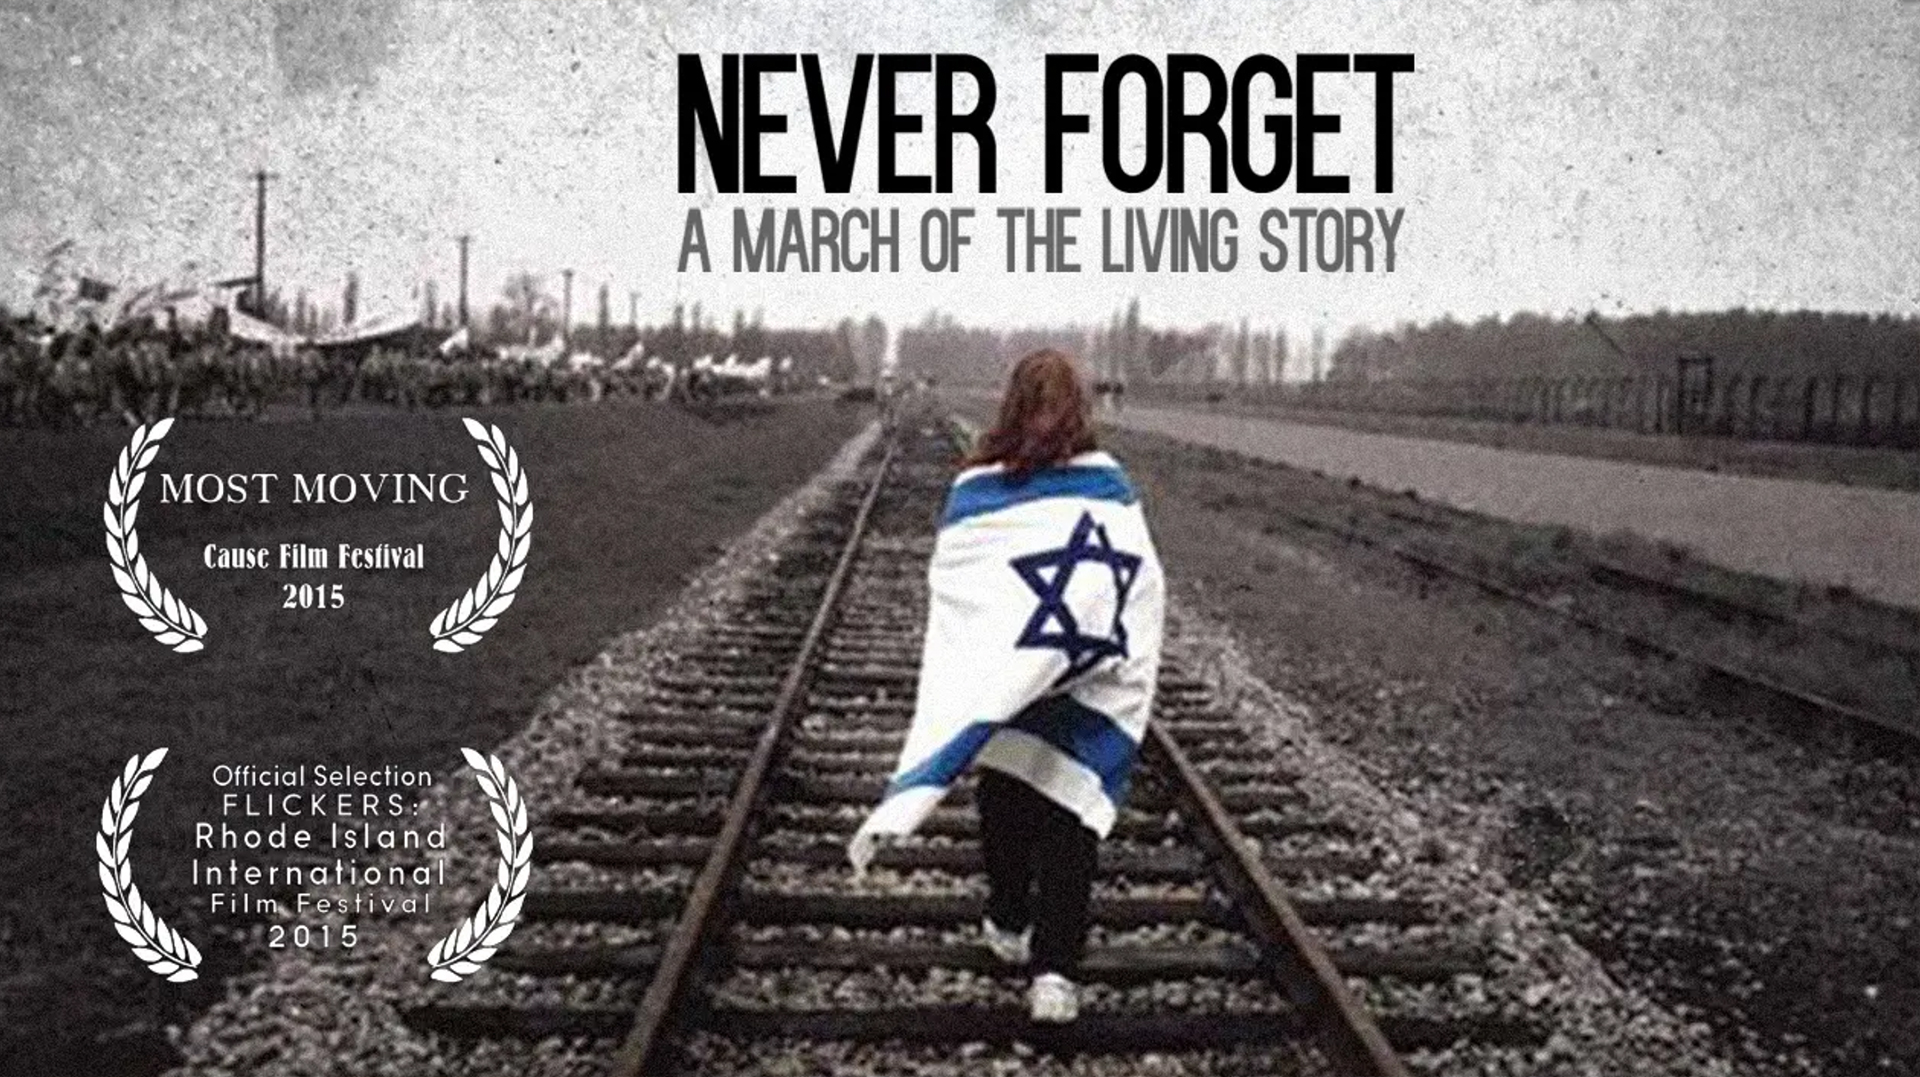 Never Forget: A March of the Living Story